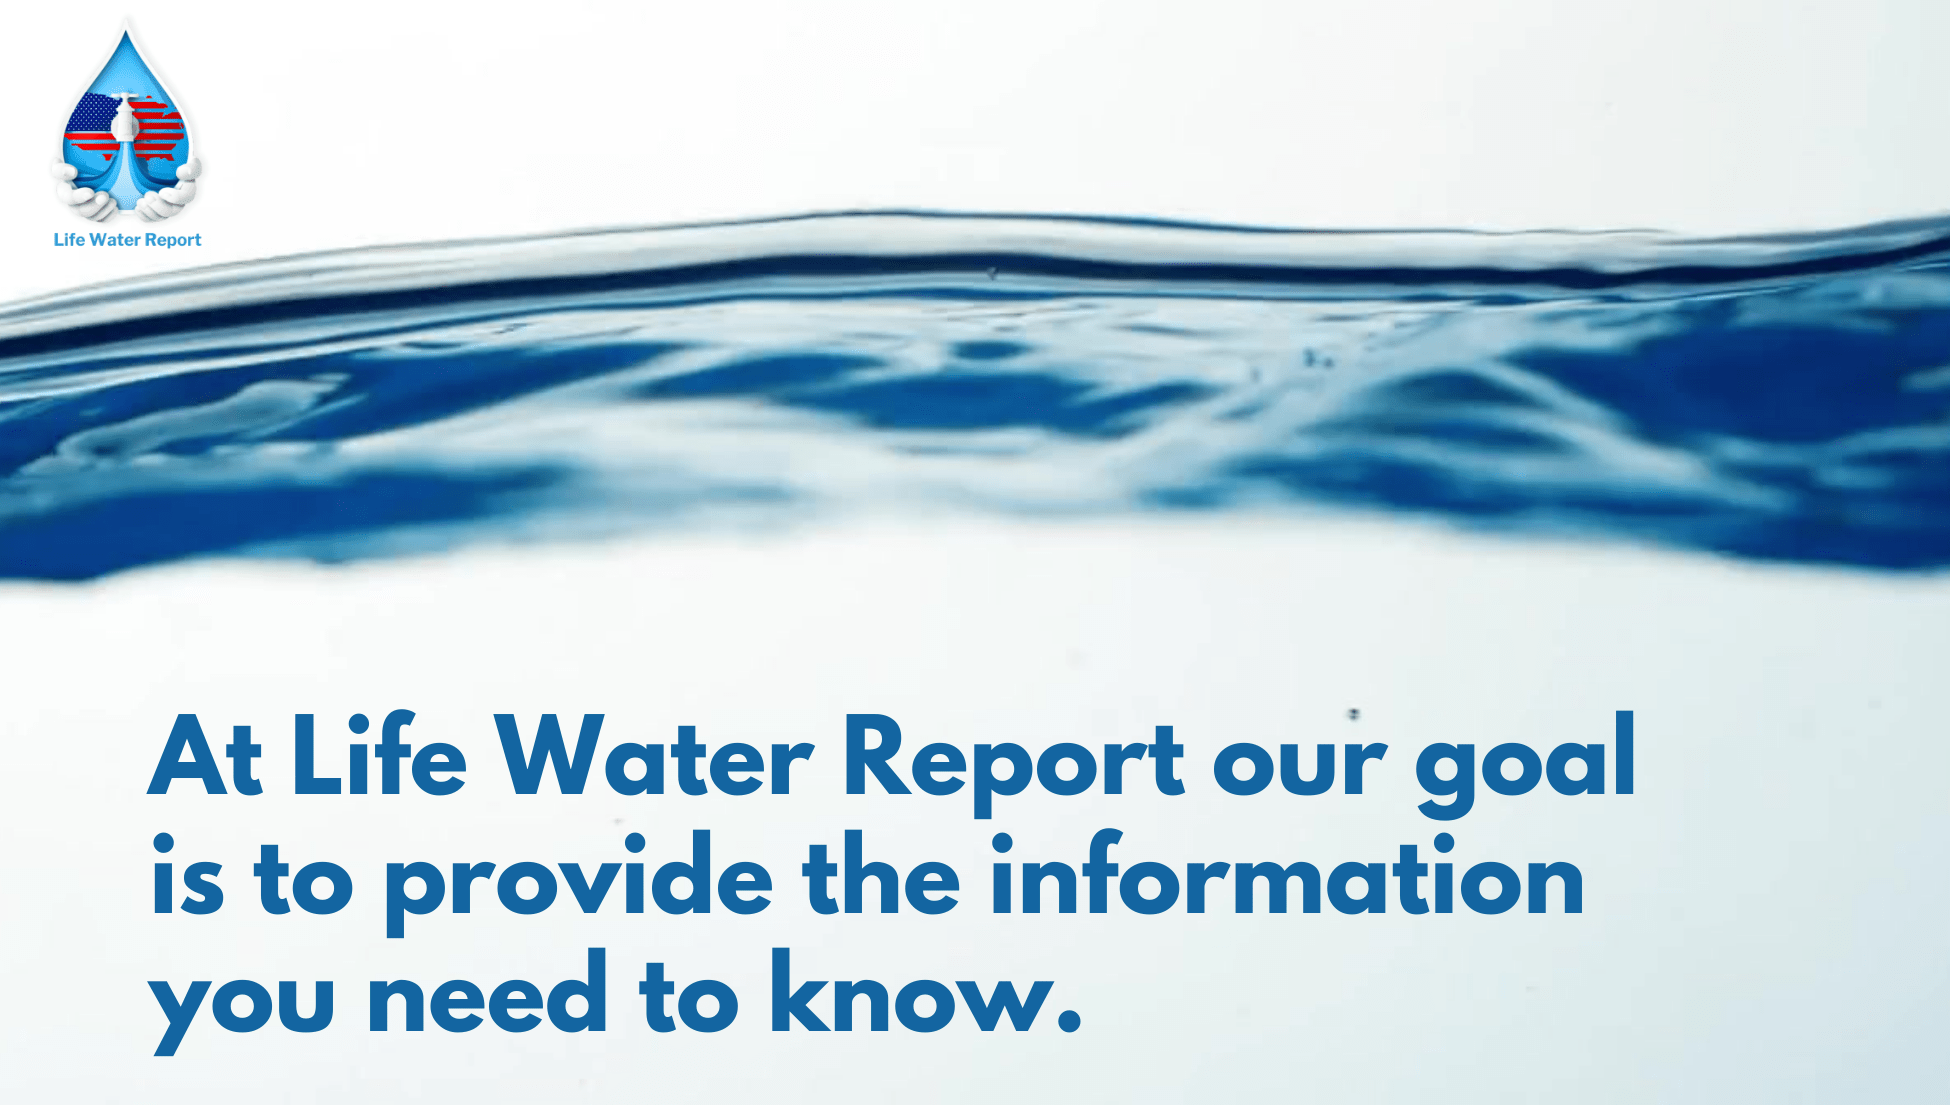 at Life water report our goal is to provide the information you need to know